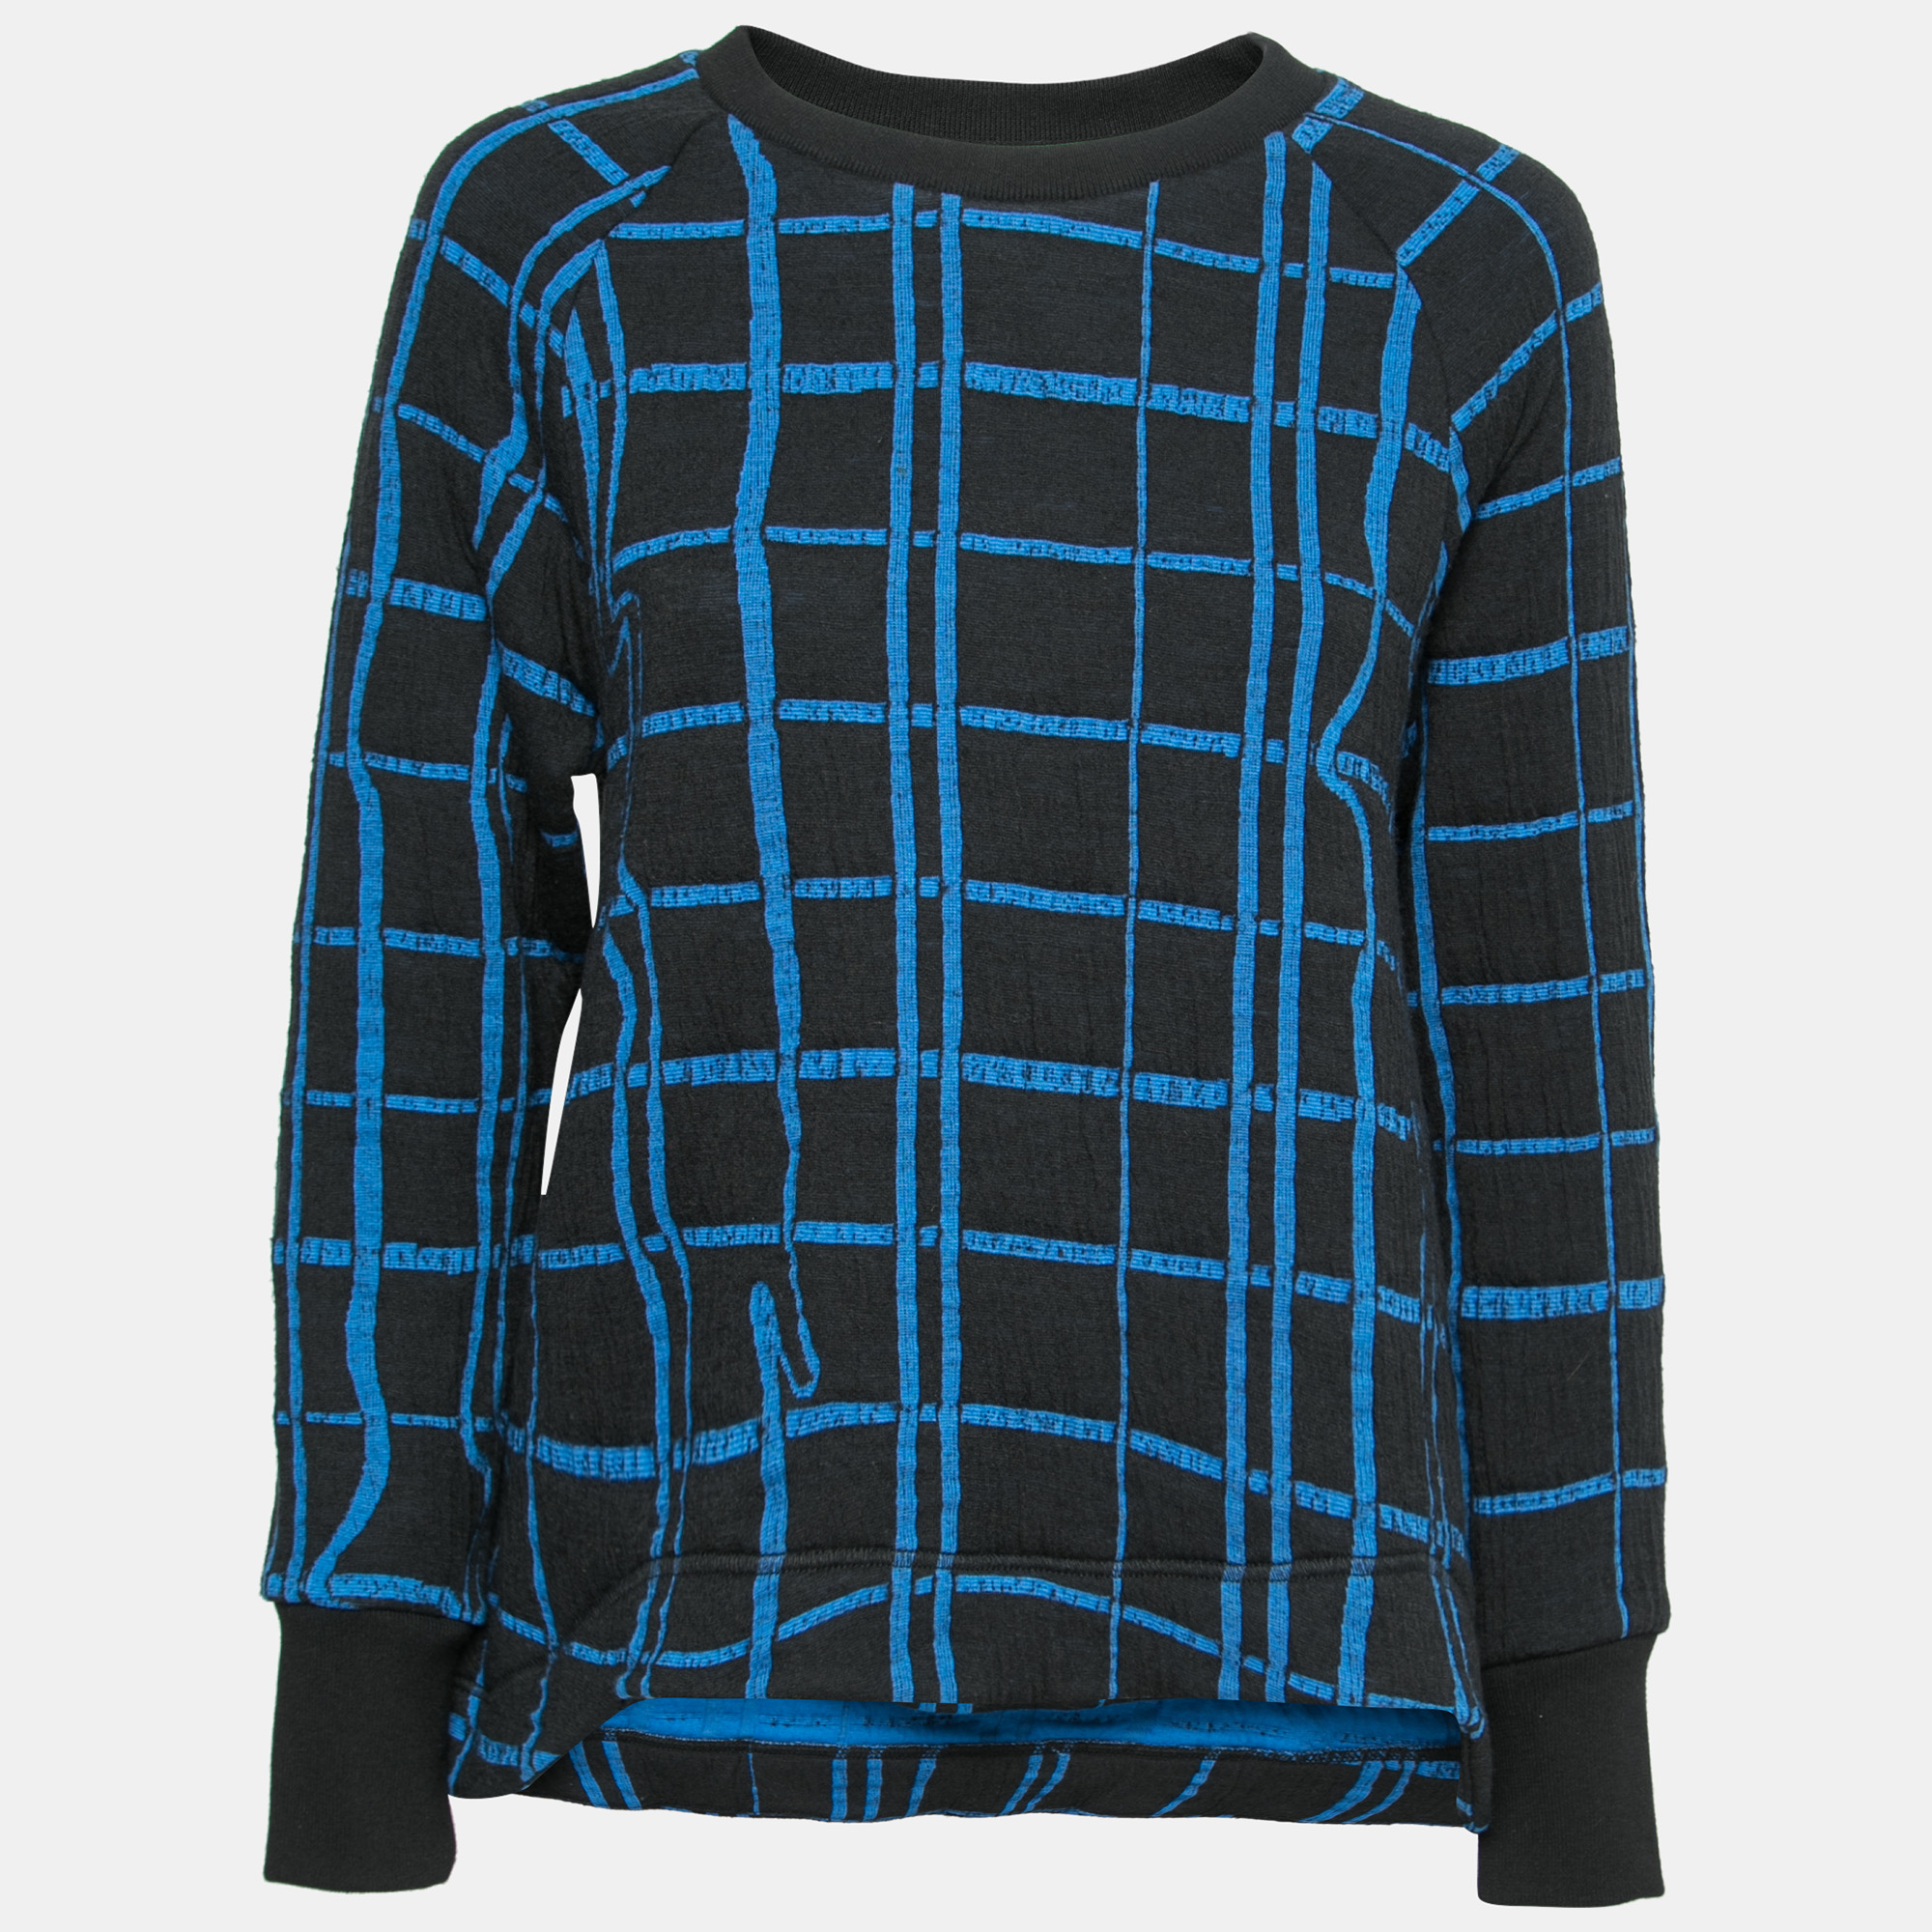 

Kenzo Blue and Black Checkered Printed Knit Long Sleeve Crew Neck Sweater